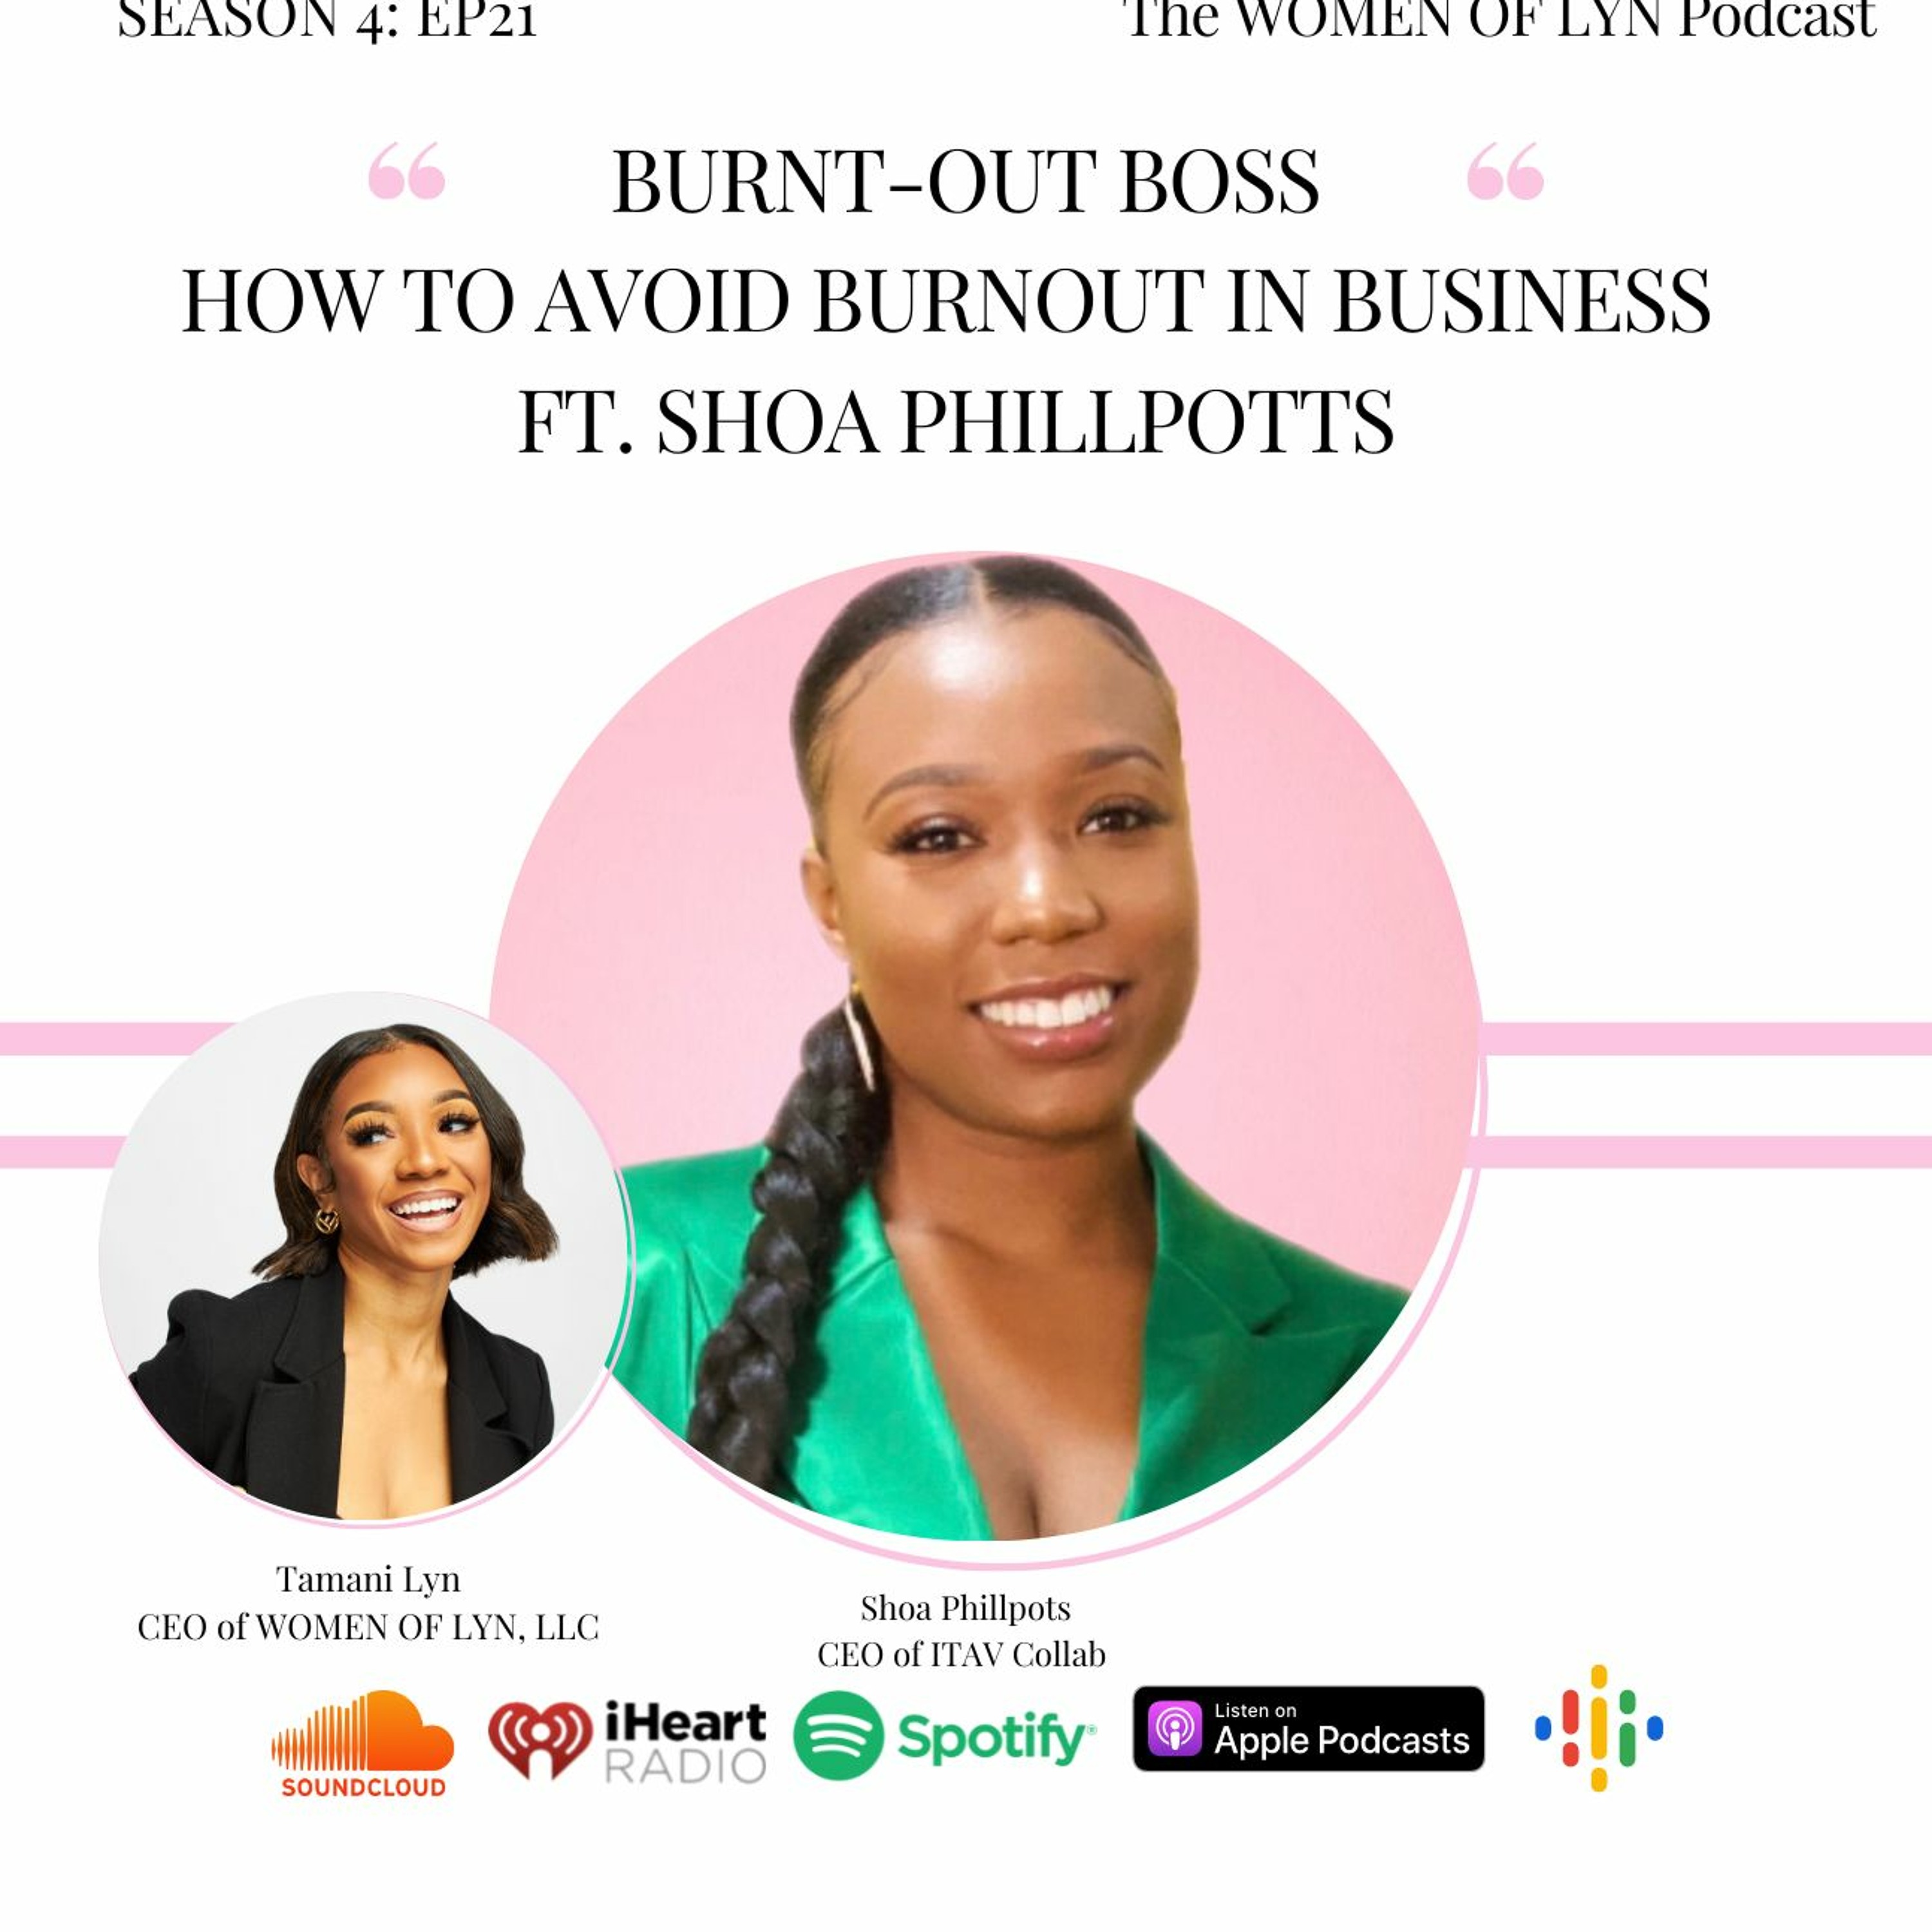 Episode 21: ”Burnt-Out Boss; How To Avoid Burnout in Business” Ft. Shoa Phillpotts